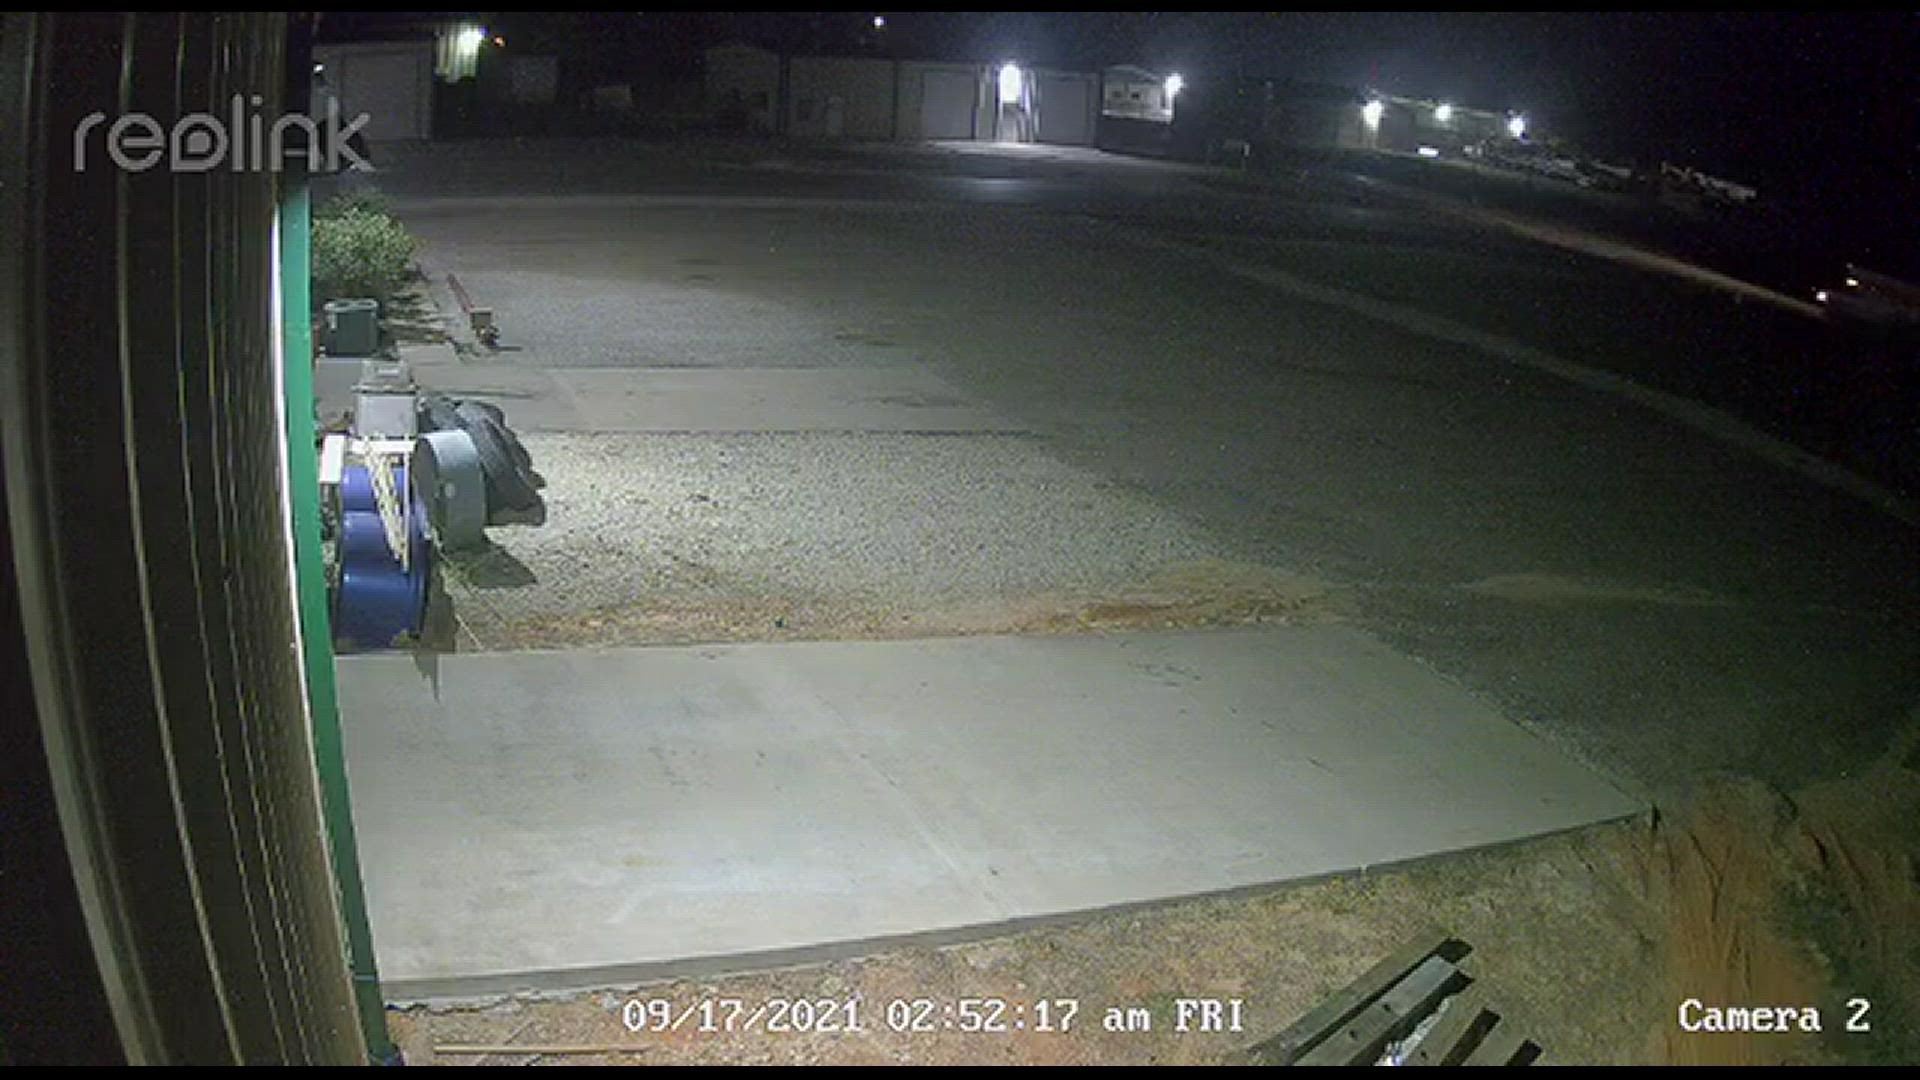 Do you know something about this crime? The Brazos County Sheriff's Office is seeking information on this tire theft from a business on Crosswind Drive.